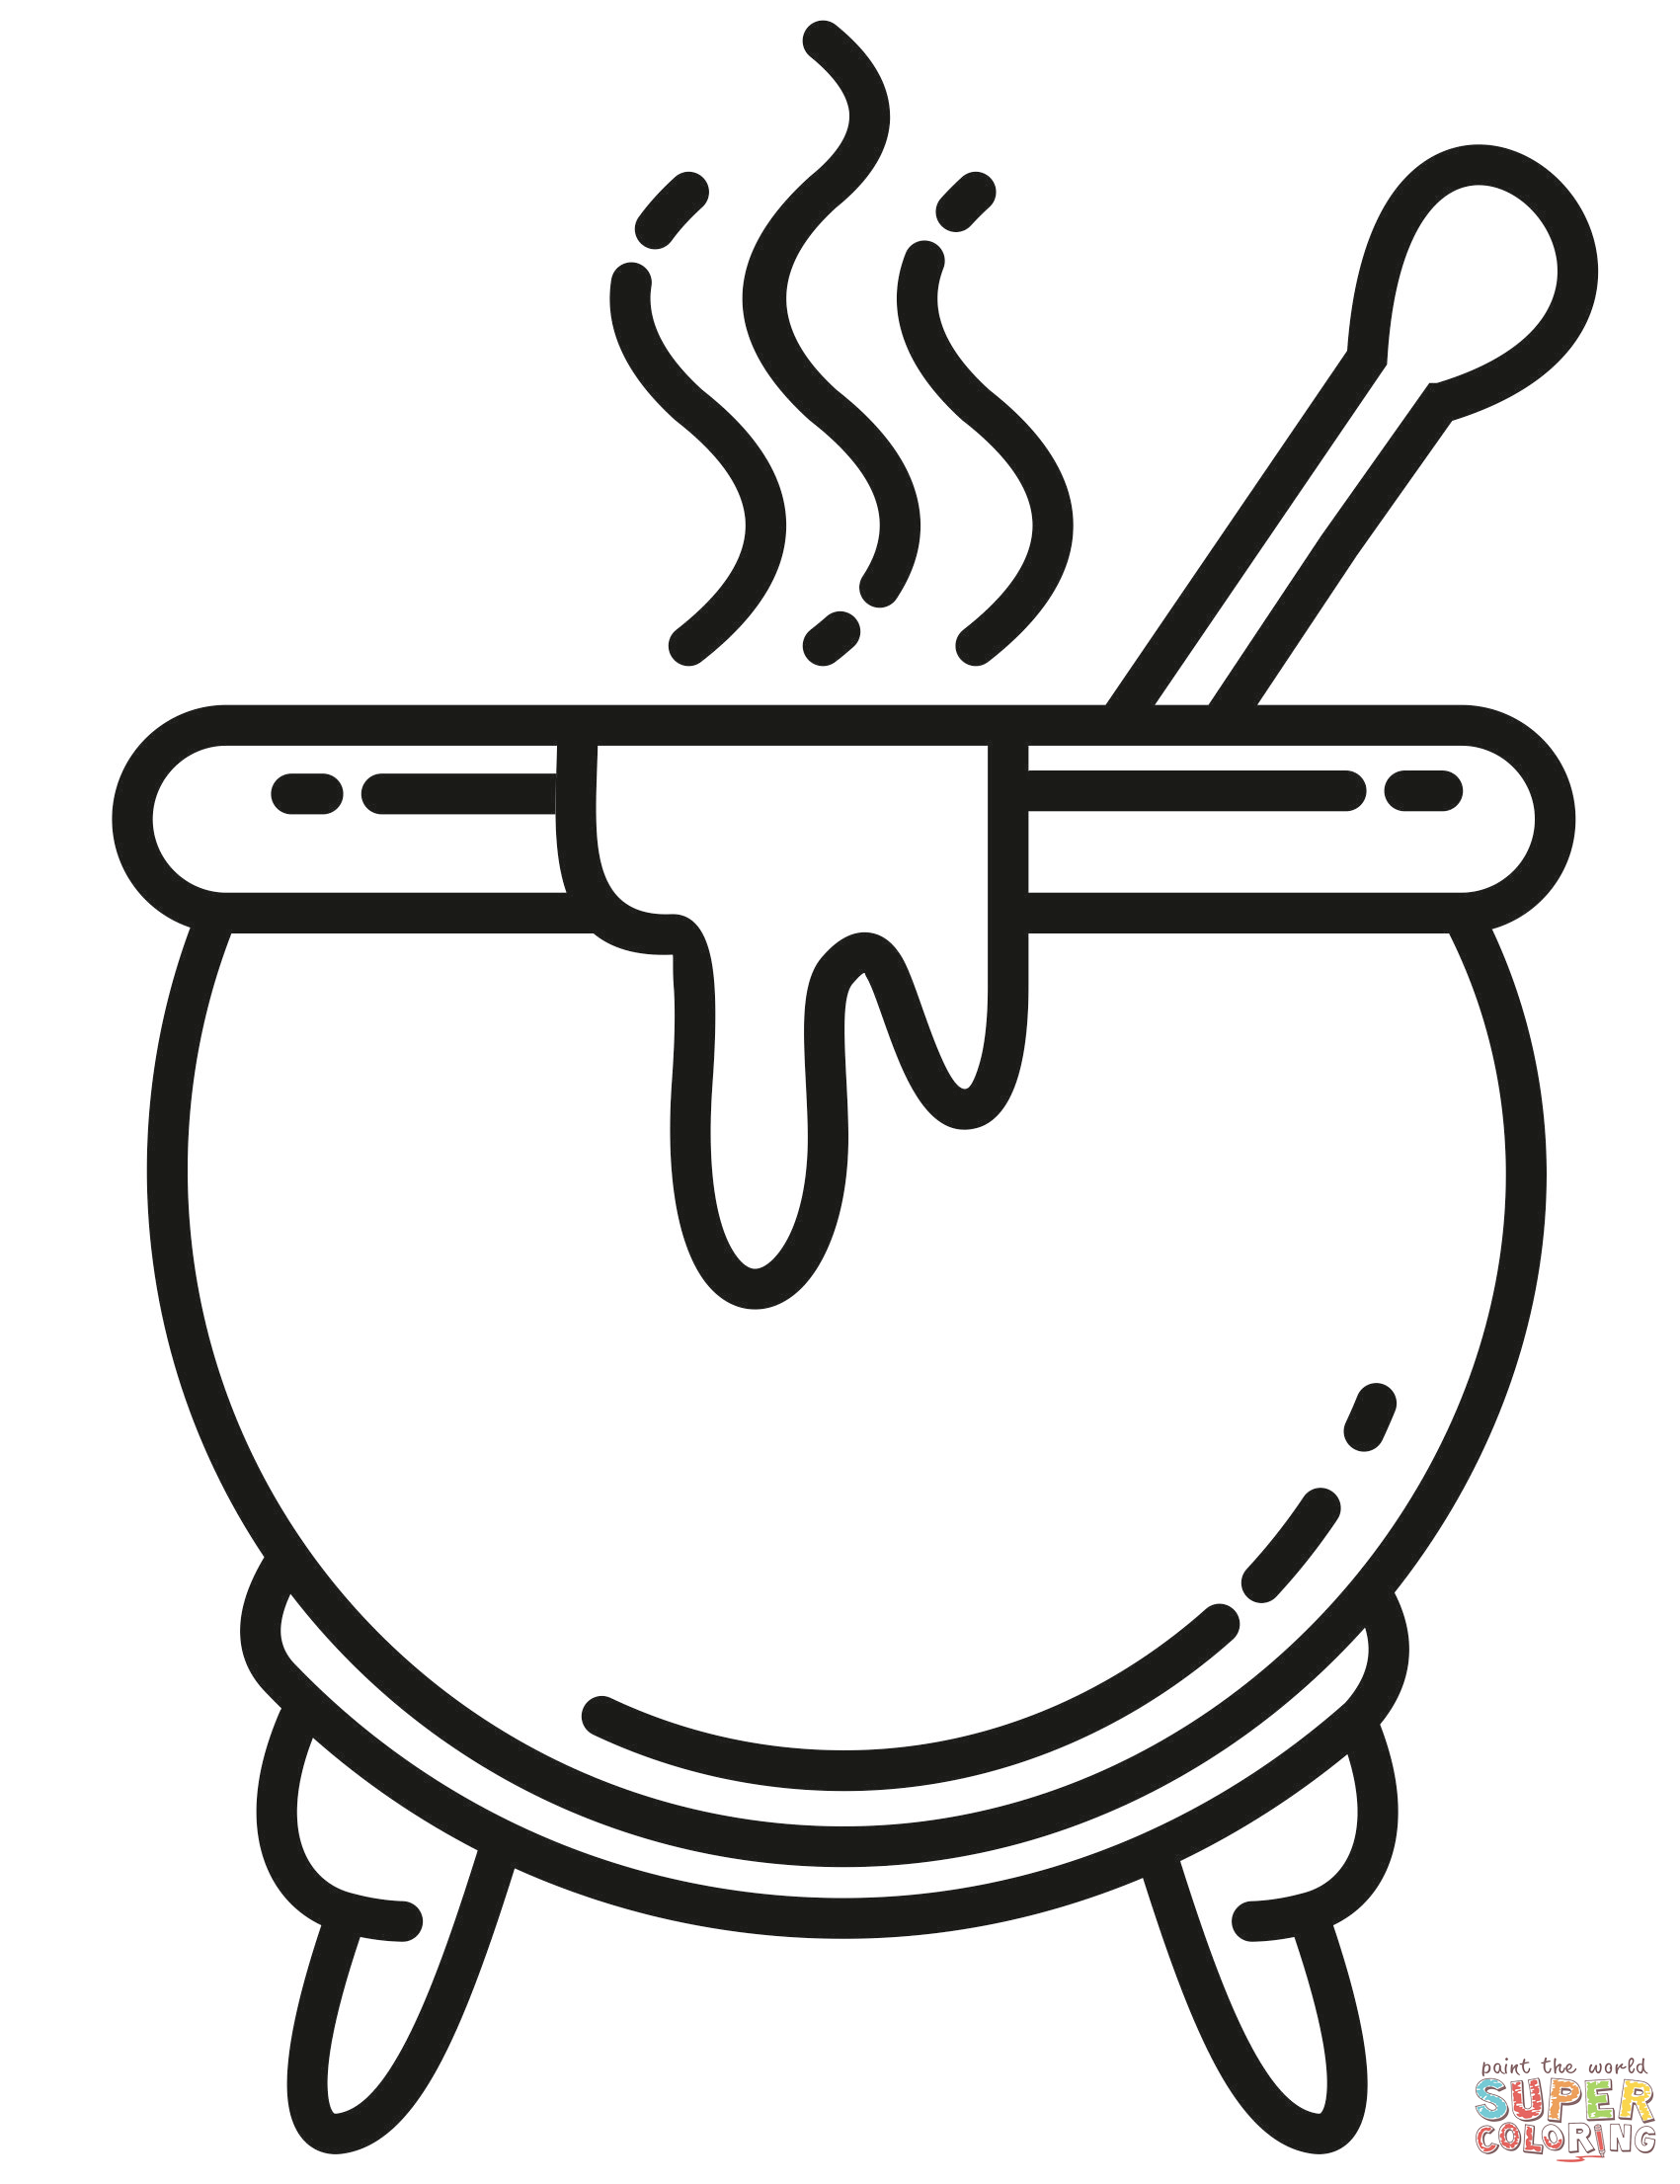 Cauldron coloring page free printable coloring pages